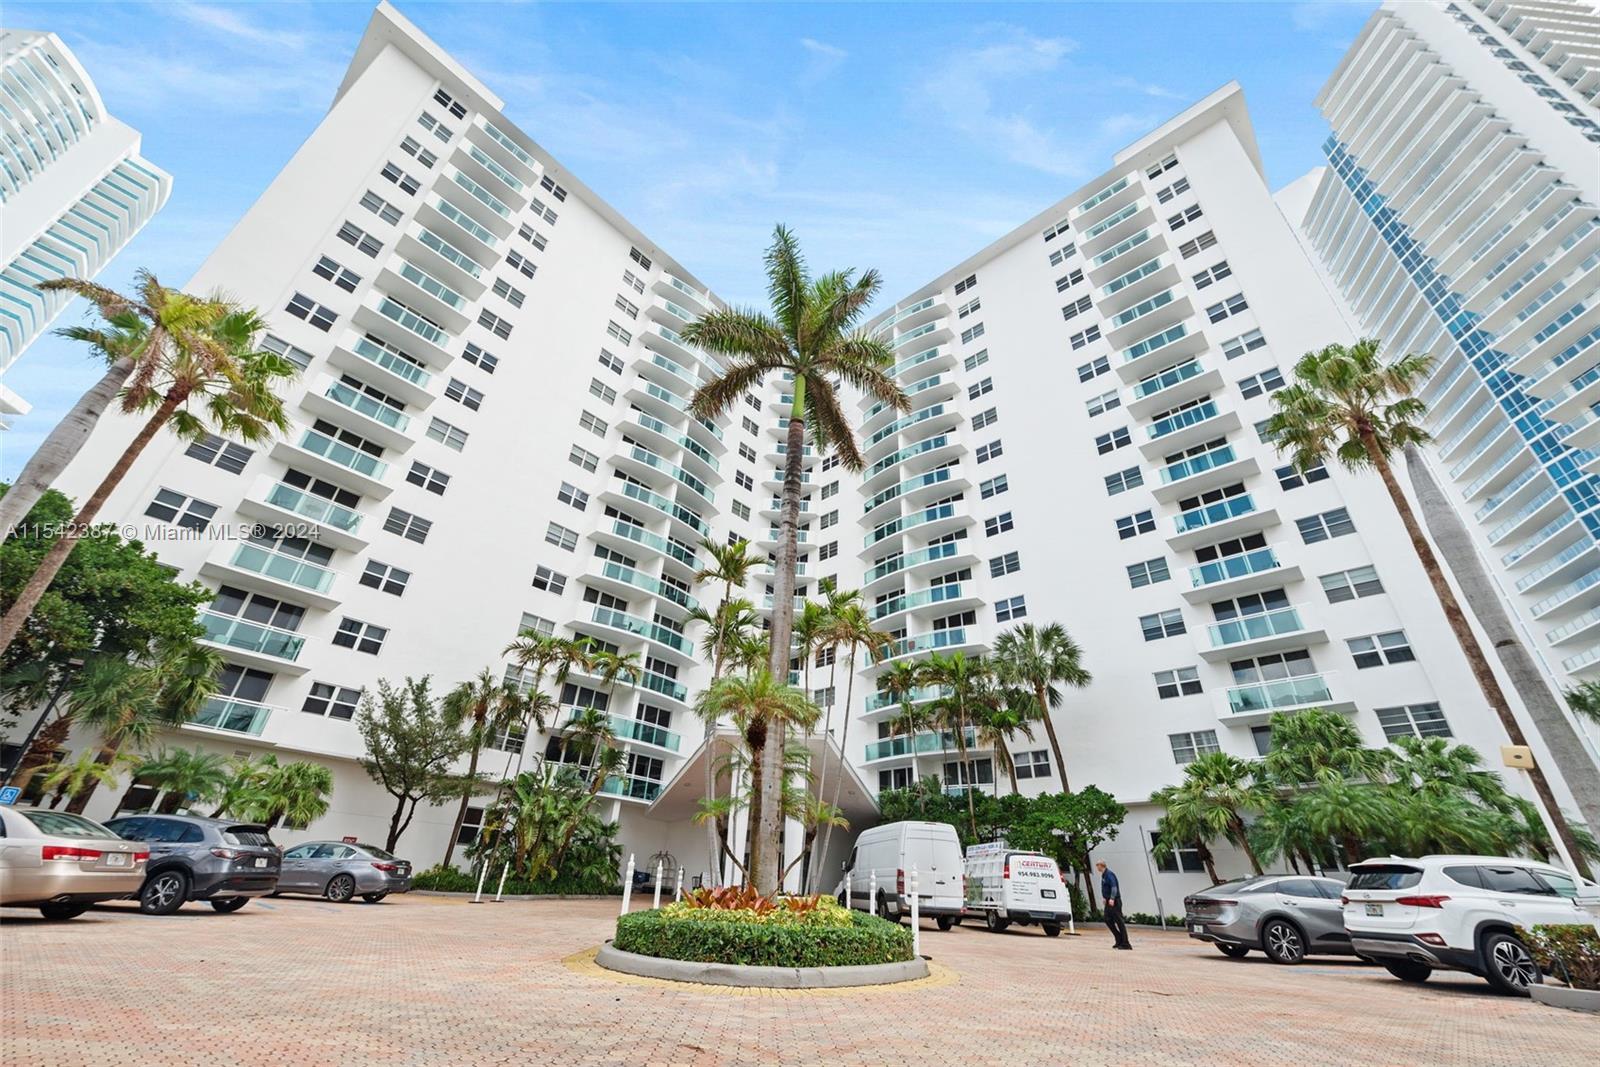 Photo of 3001 S Ocean Dr #1407 in Hollywood, FL